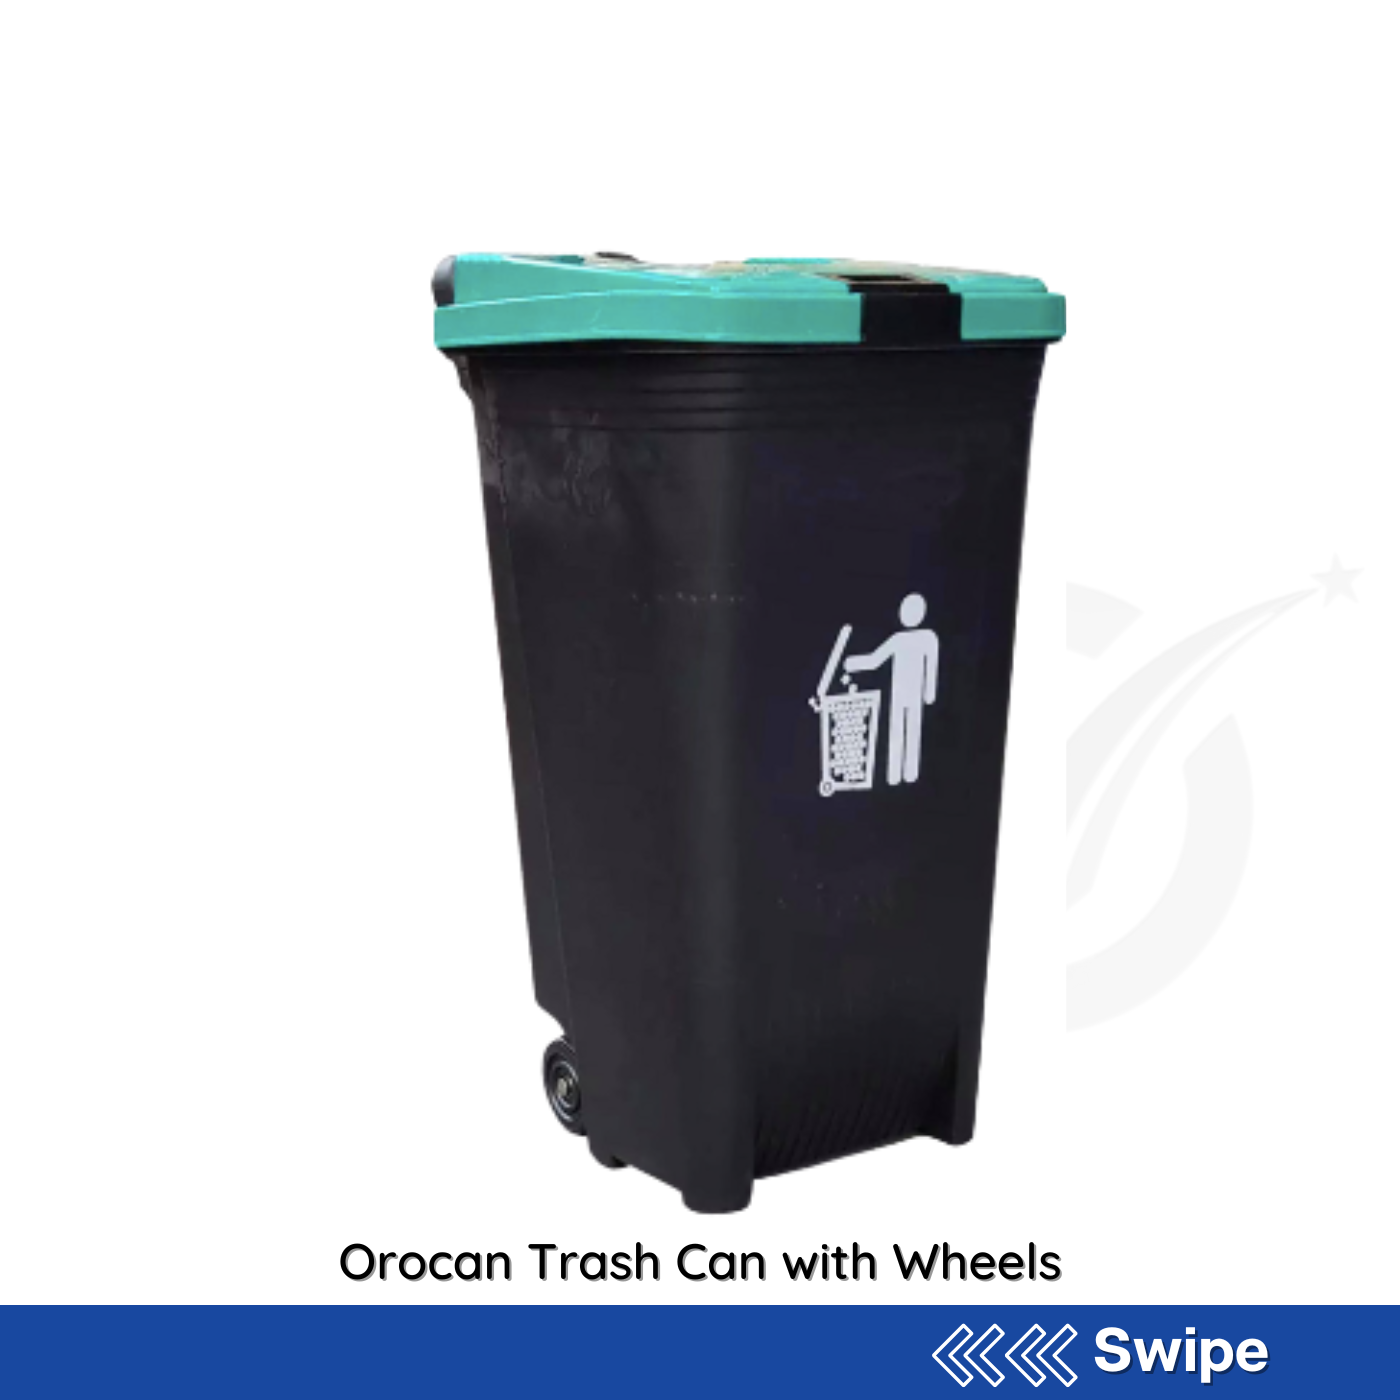 Orocan Trash Can with Wheels